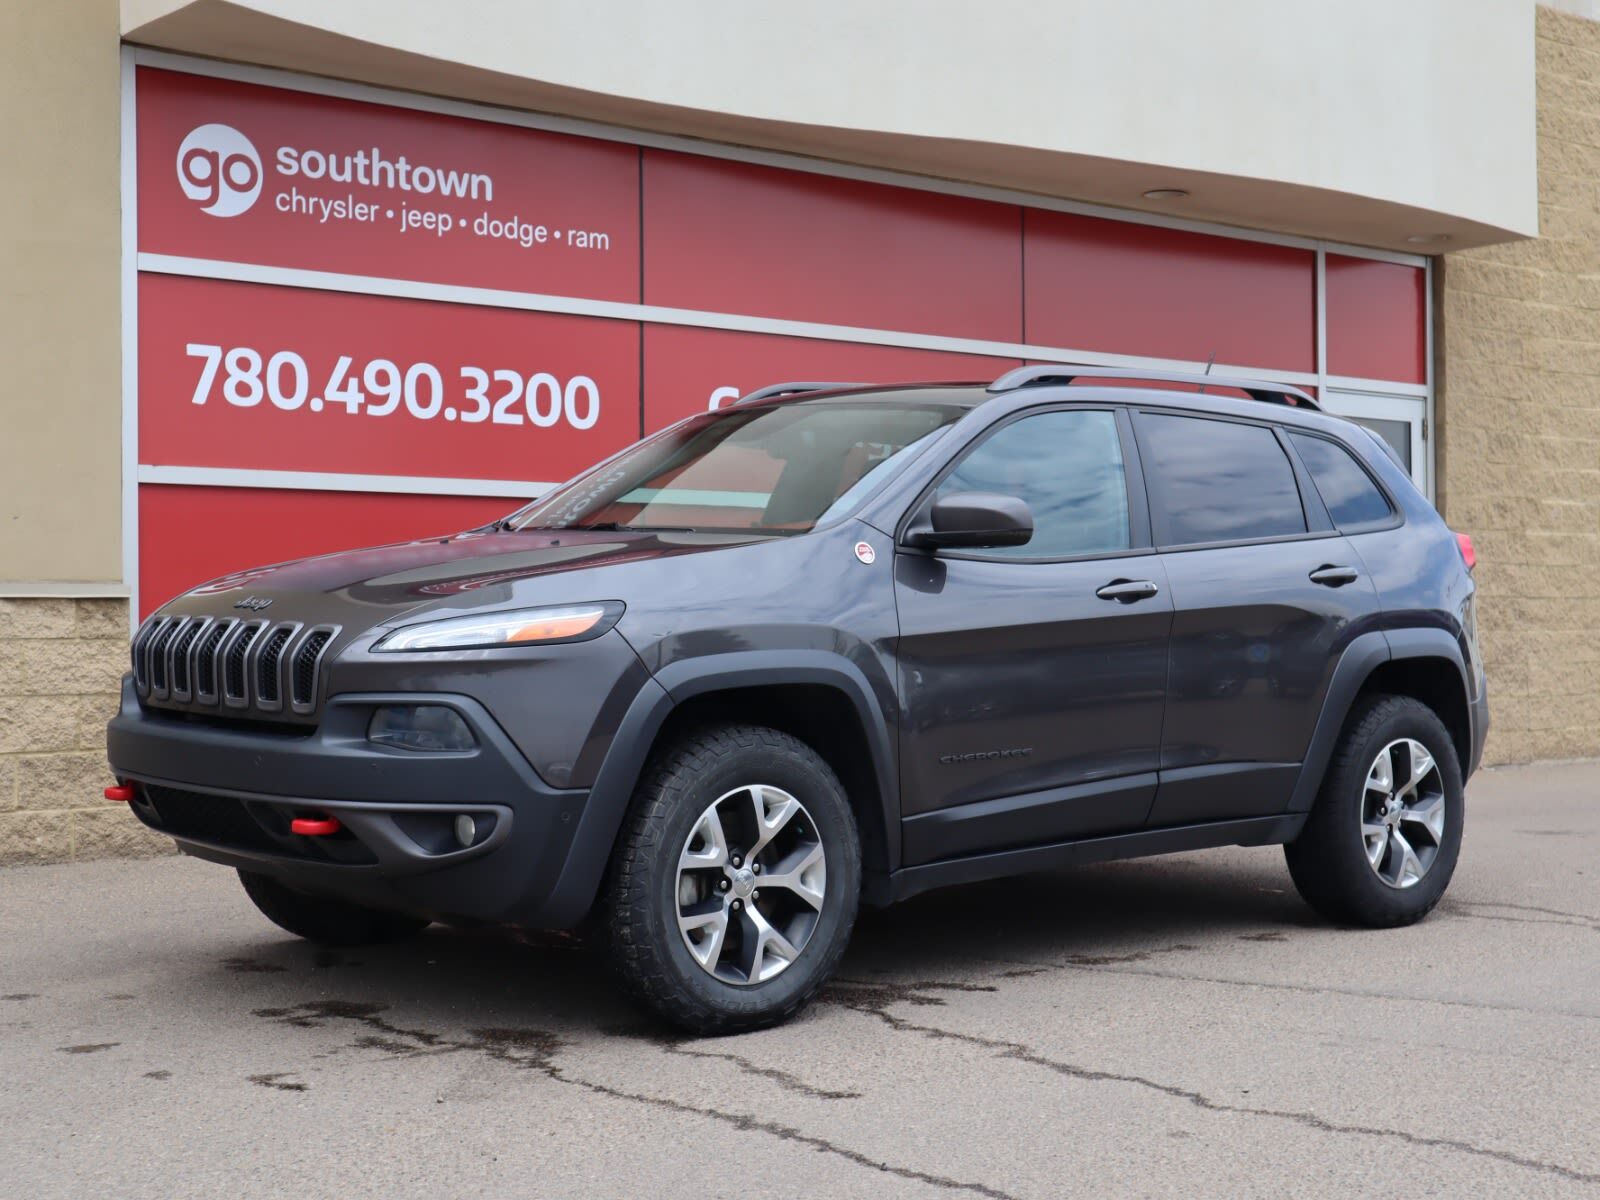 2015 Jeep Cherokee TRAILHAWK IN GRANITE CRYSTAL METALLIC EQUIPPED WIT